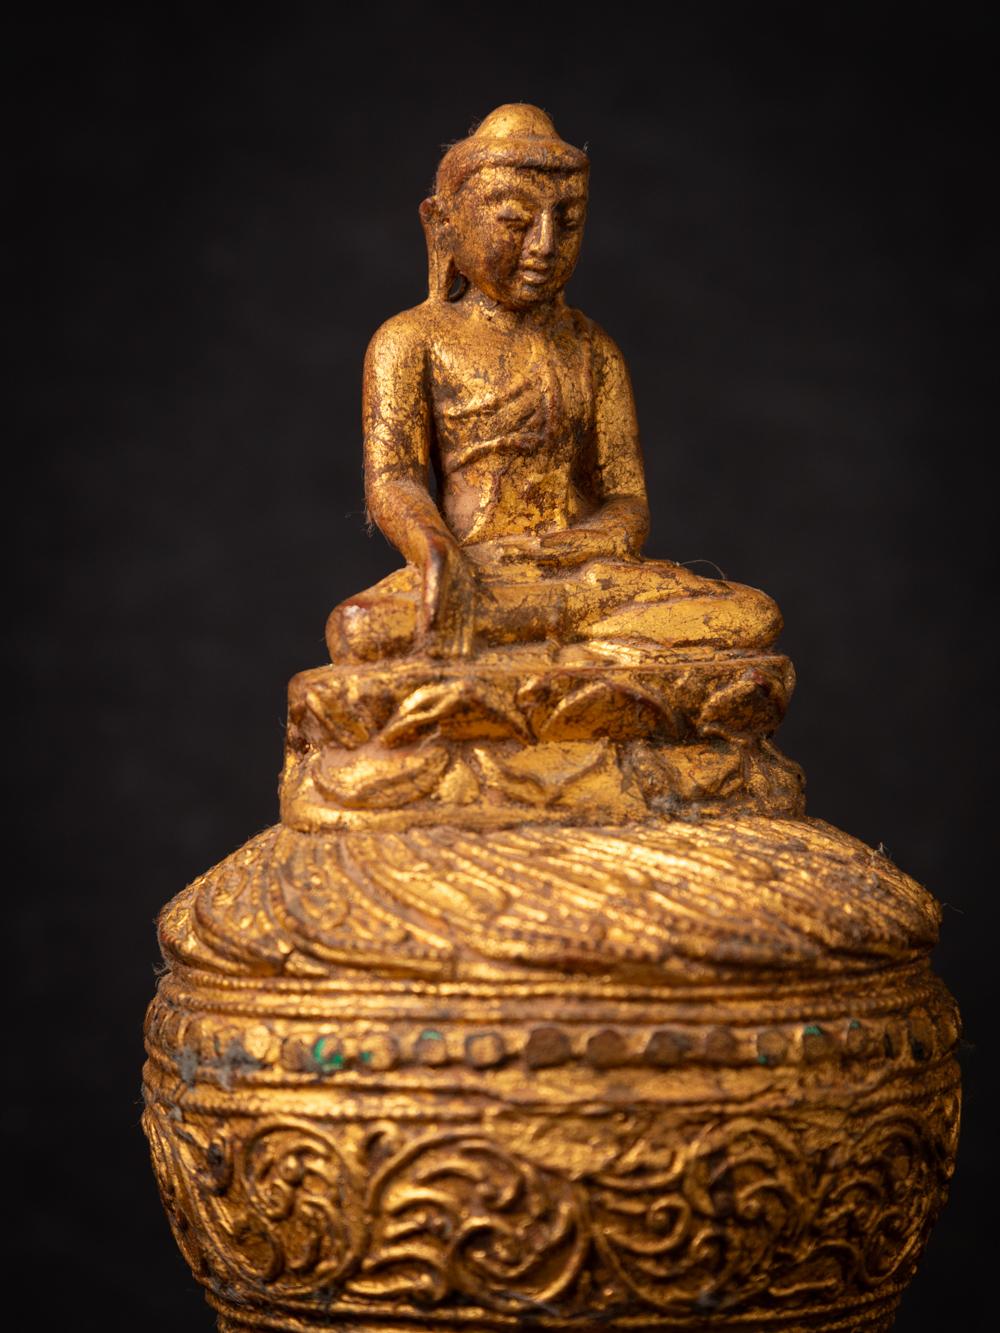 This old wooden Burmese Monk statue is a testament to the artistic traditions and spiritual heritage of Burma (now Myanmar). Crafted from wood, this statue stands at a height of 25 cm with dimensions of 11.5 cm in width and 11.5 cm in depth. Dating